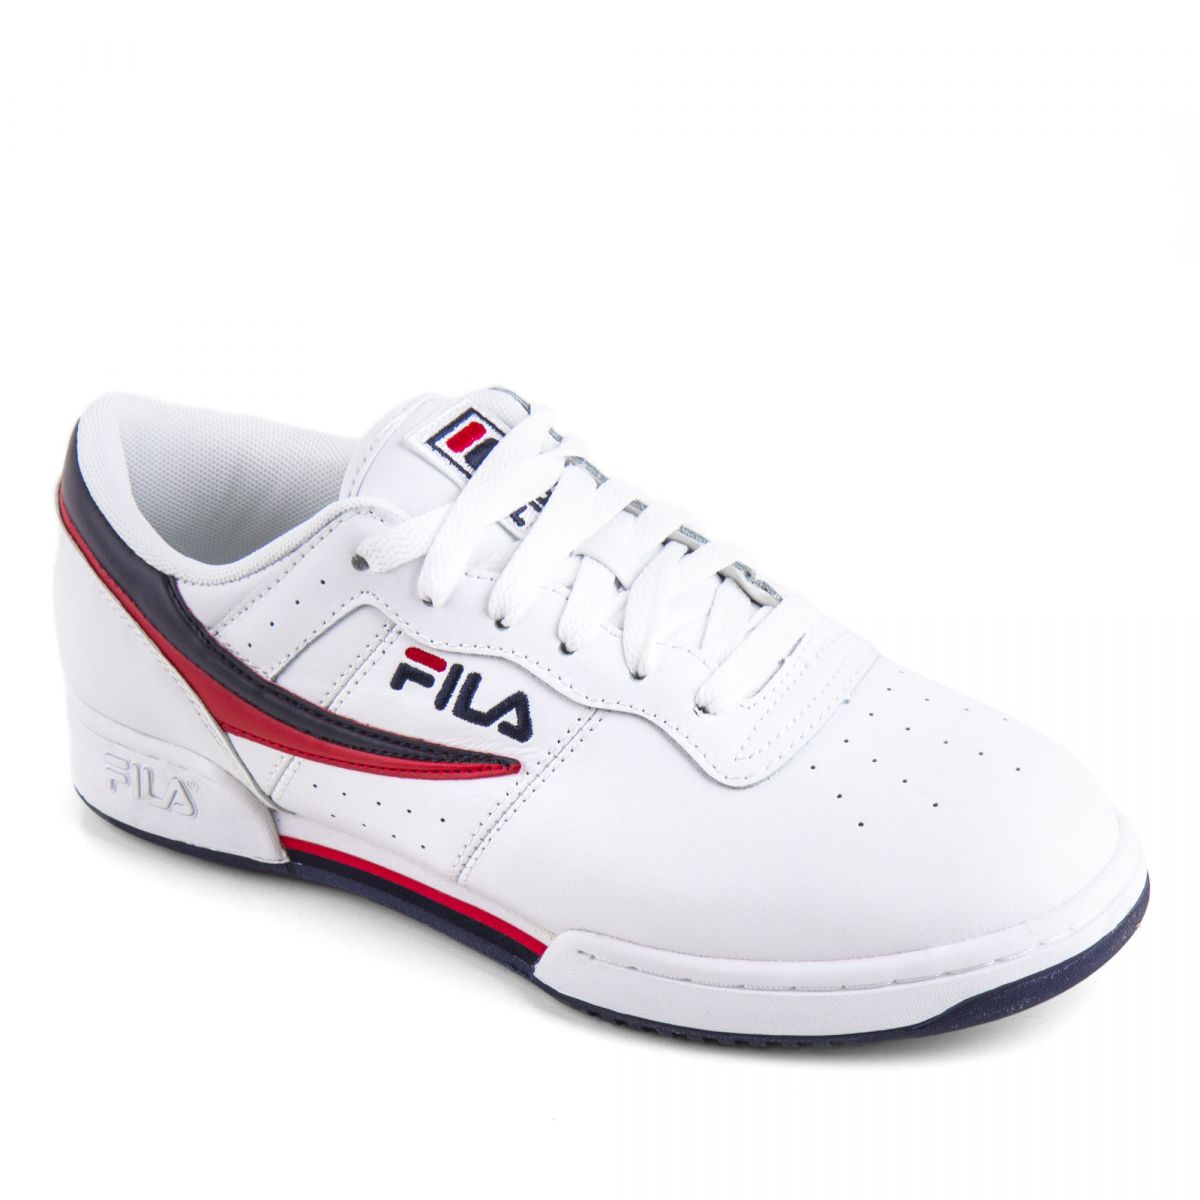 Homme Chaussures Fila Homme Baskets Fila Homme Baskets Fila Homme Baskets FILA 40 rouge 